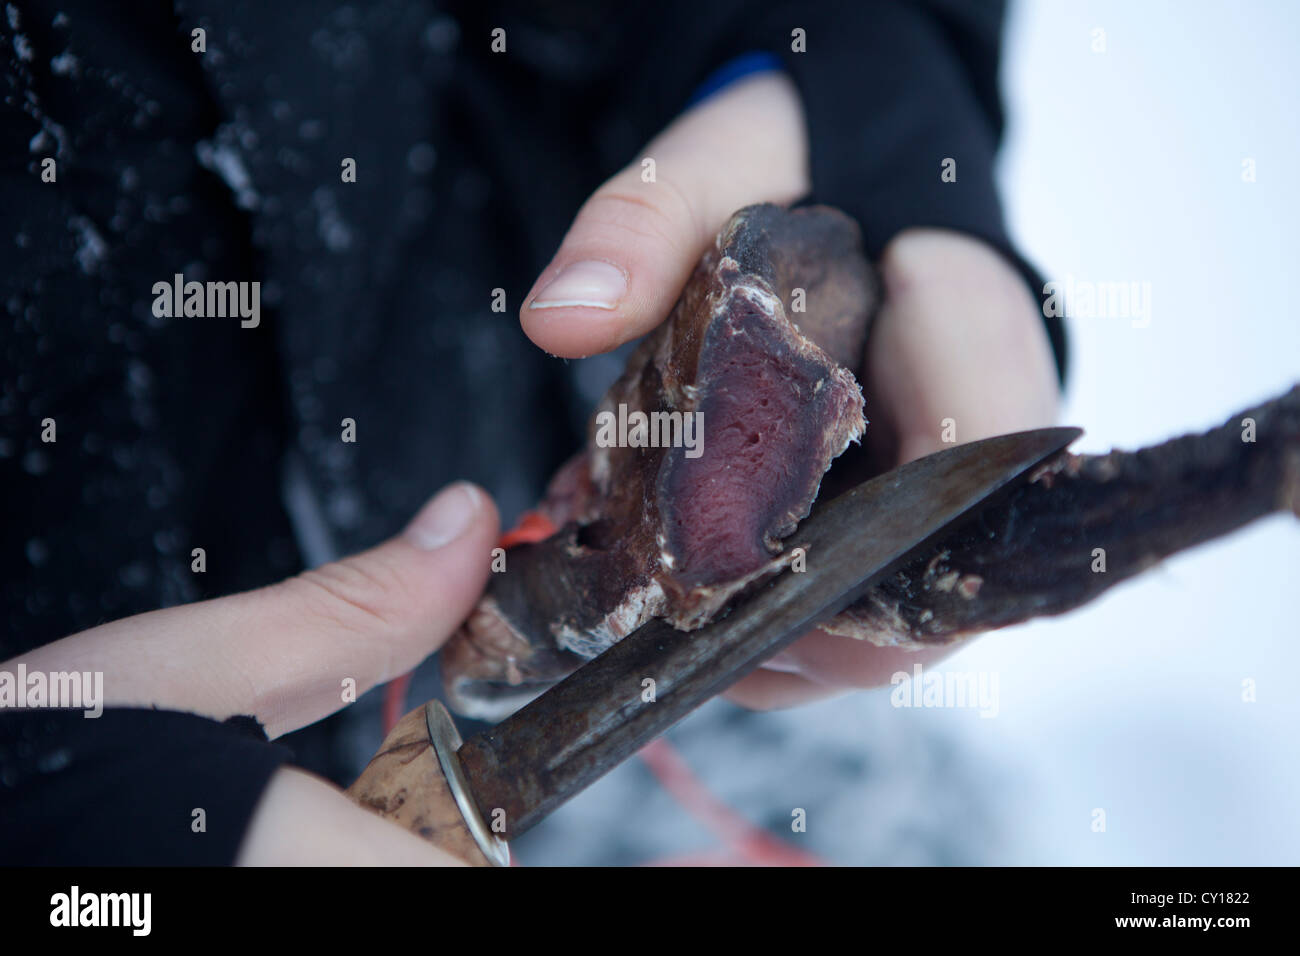 reindeer meat as a snack in Finland Stock Photo